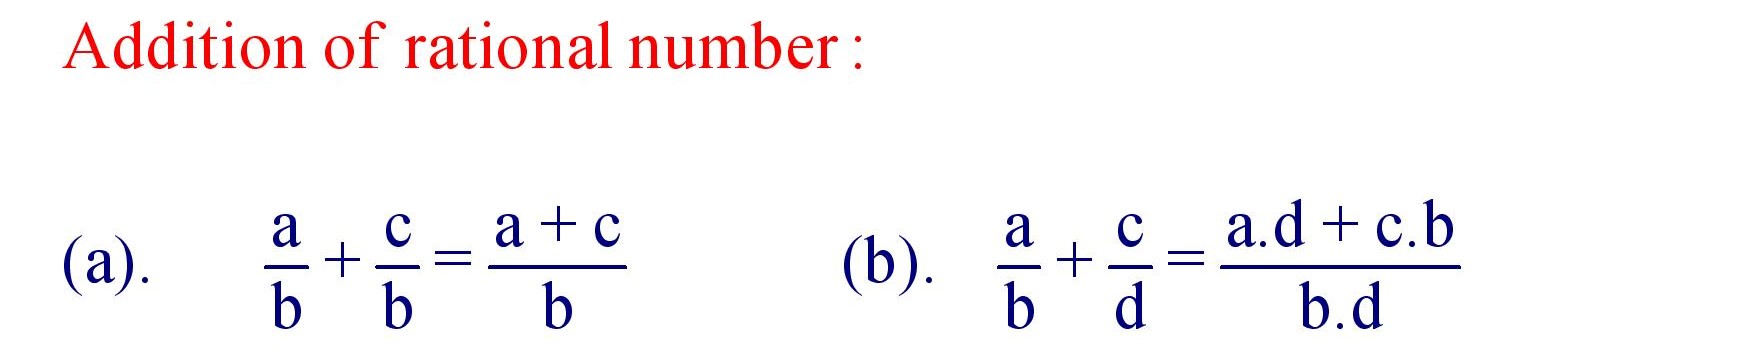 Addition of Rational Number